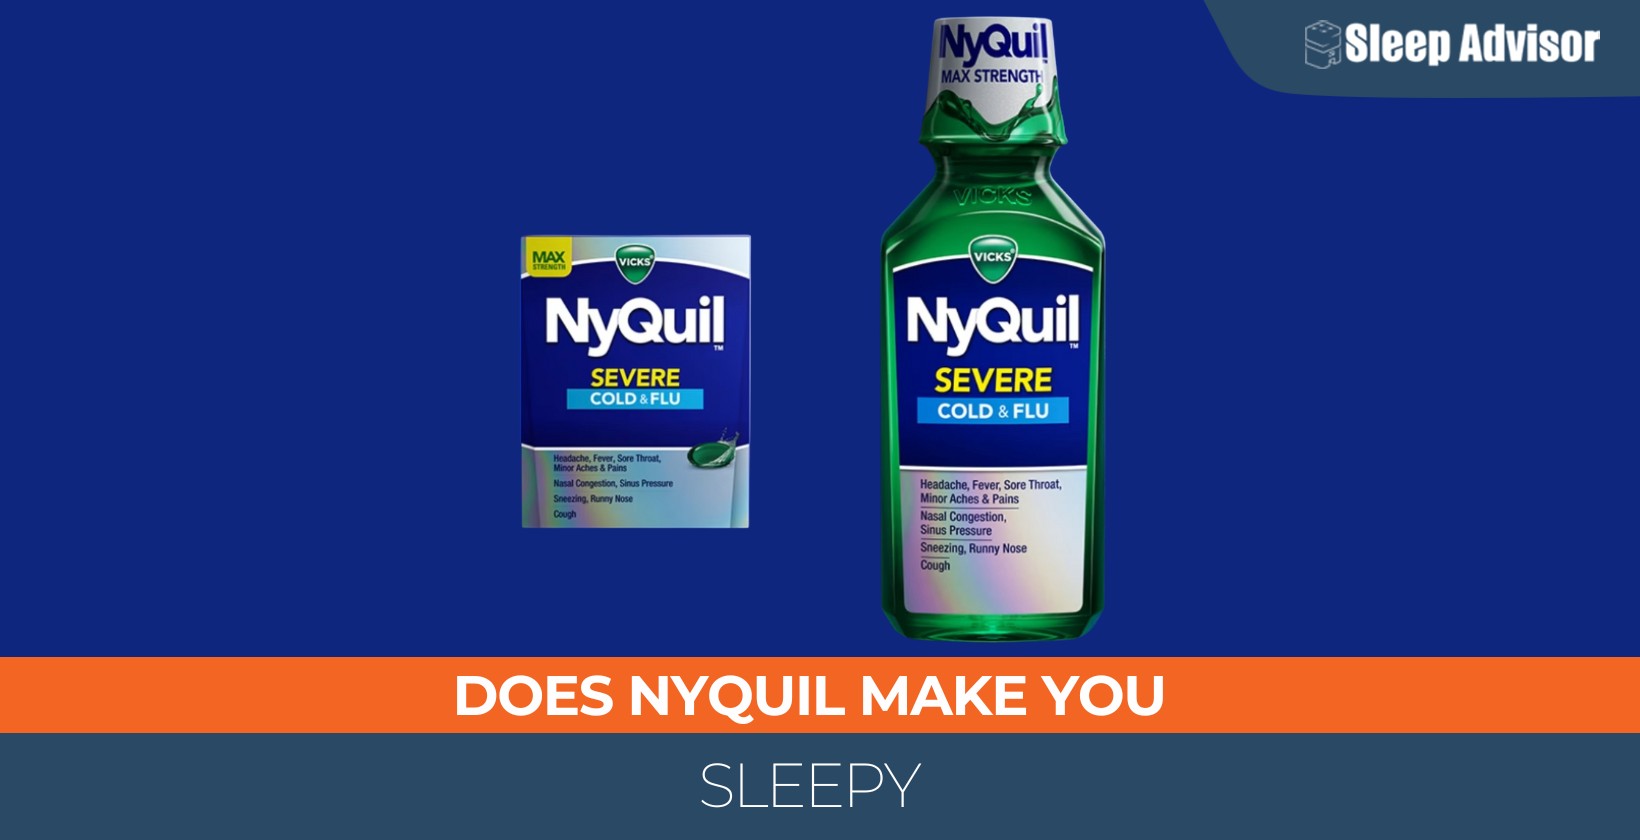 Does NyQuil Make You Sleepy?